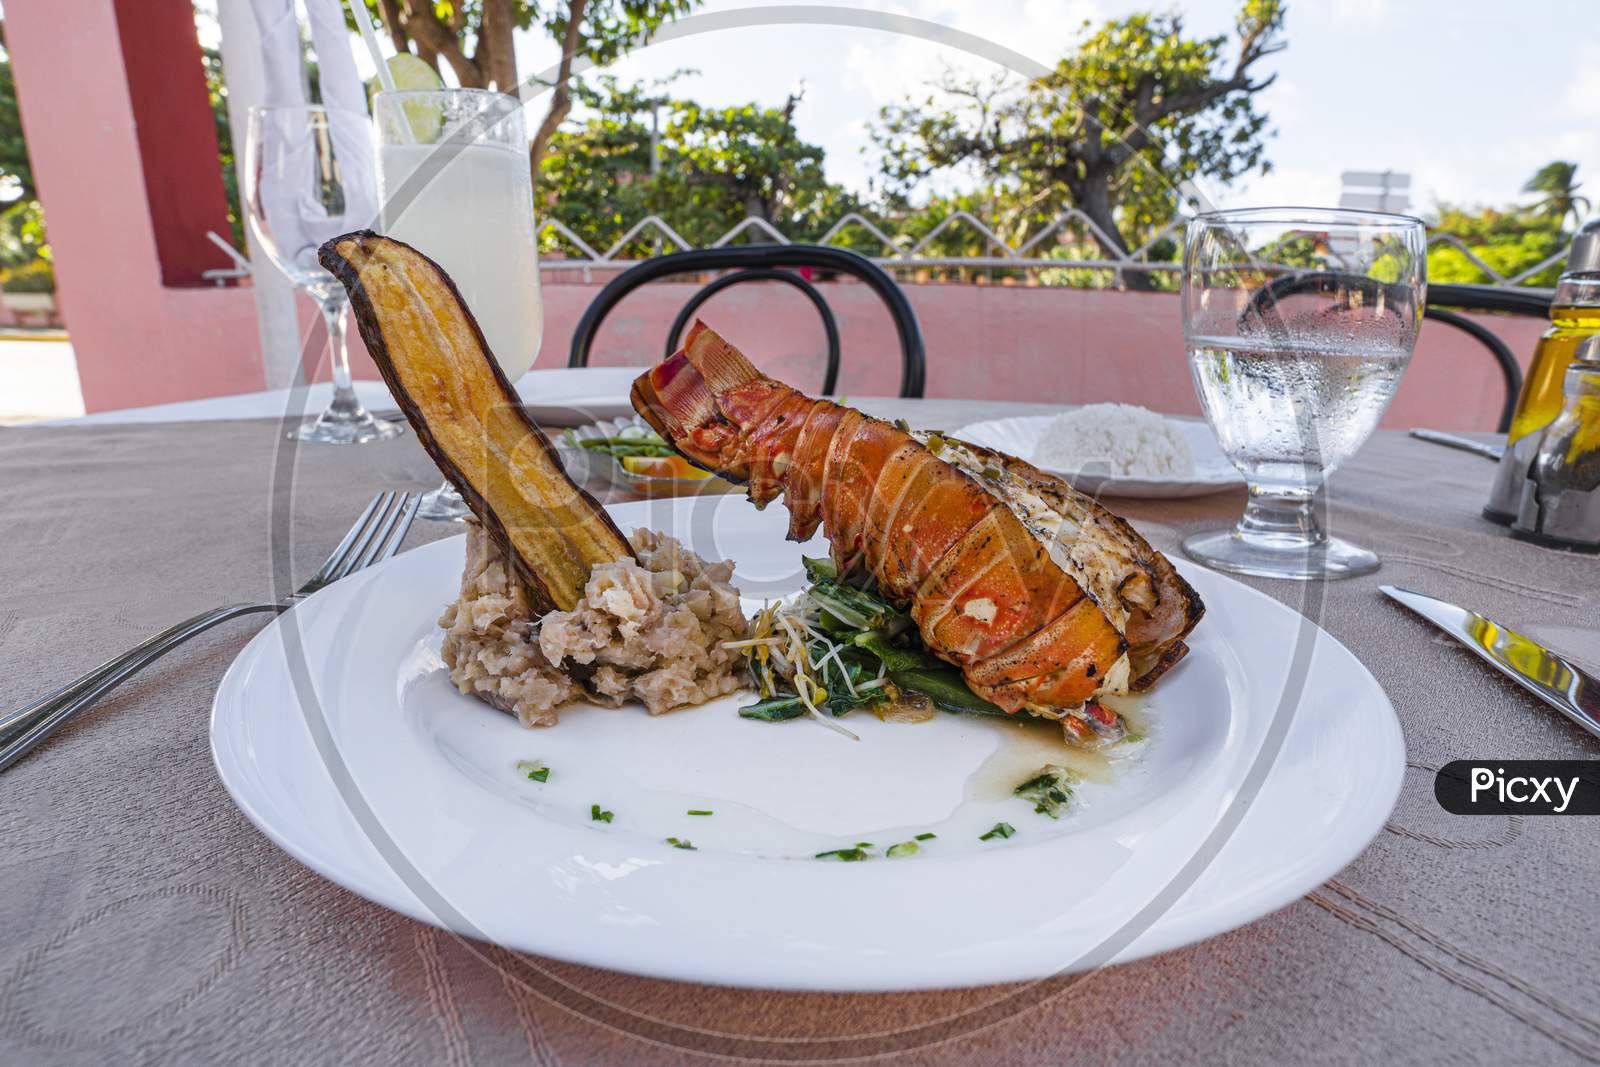 Grilled Lobster Is Beautifully Placed On A Plate Along With A Side Dish Of Mashed Potatoes, Fried Banana, Vegetables, Rice And A Glass Of Cocktail. Expensive Dinner At A Restaurant Outdoor